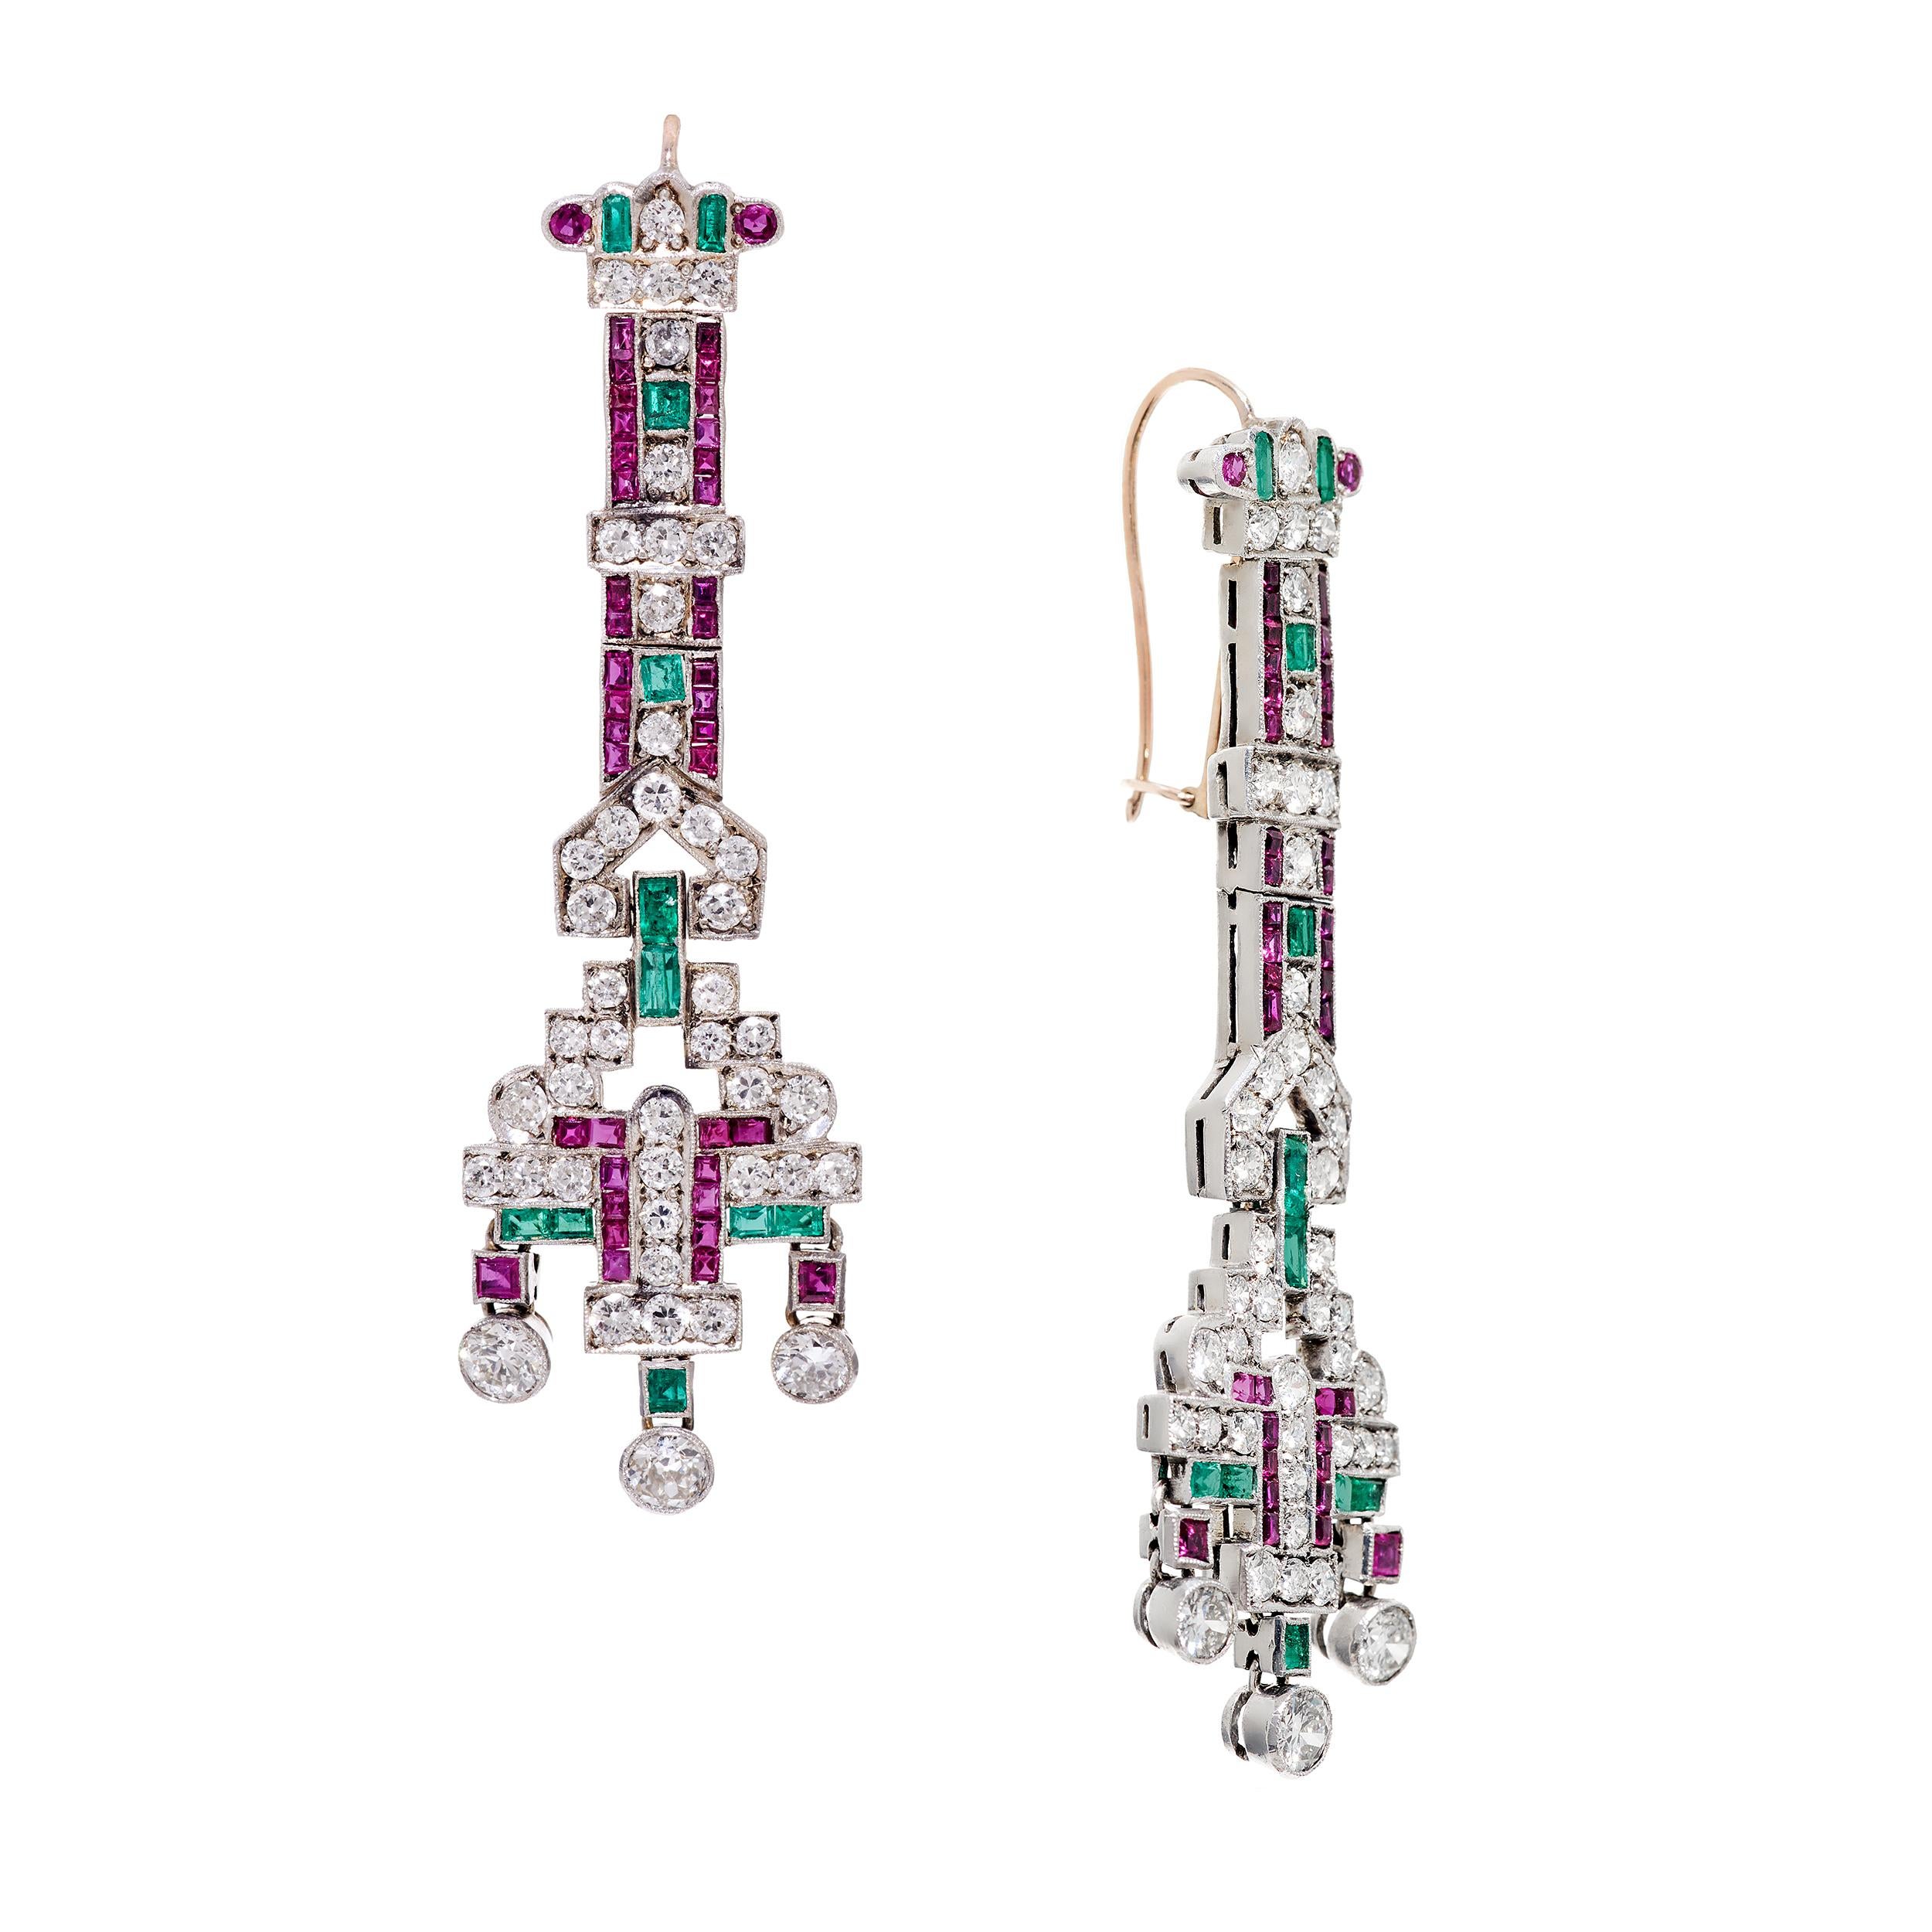 Absolutely stunning earrings from the early 20th century.  They sit so perfectly on the ear without the slightest pulling.  I reference these earrings as the perfect dangle.  

Gemstone Detail
Rubies Approximate Weight 3.20 Carats
- 4 Round Rubies